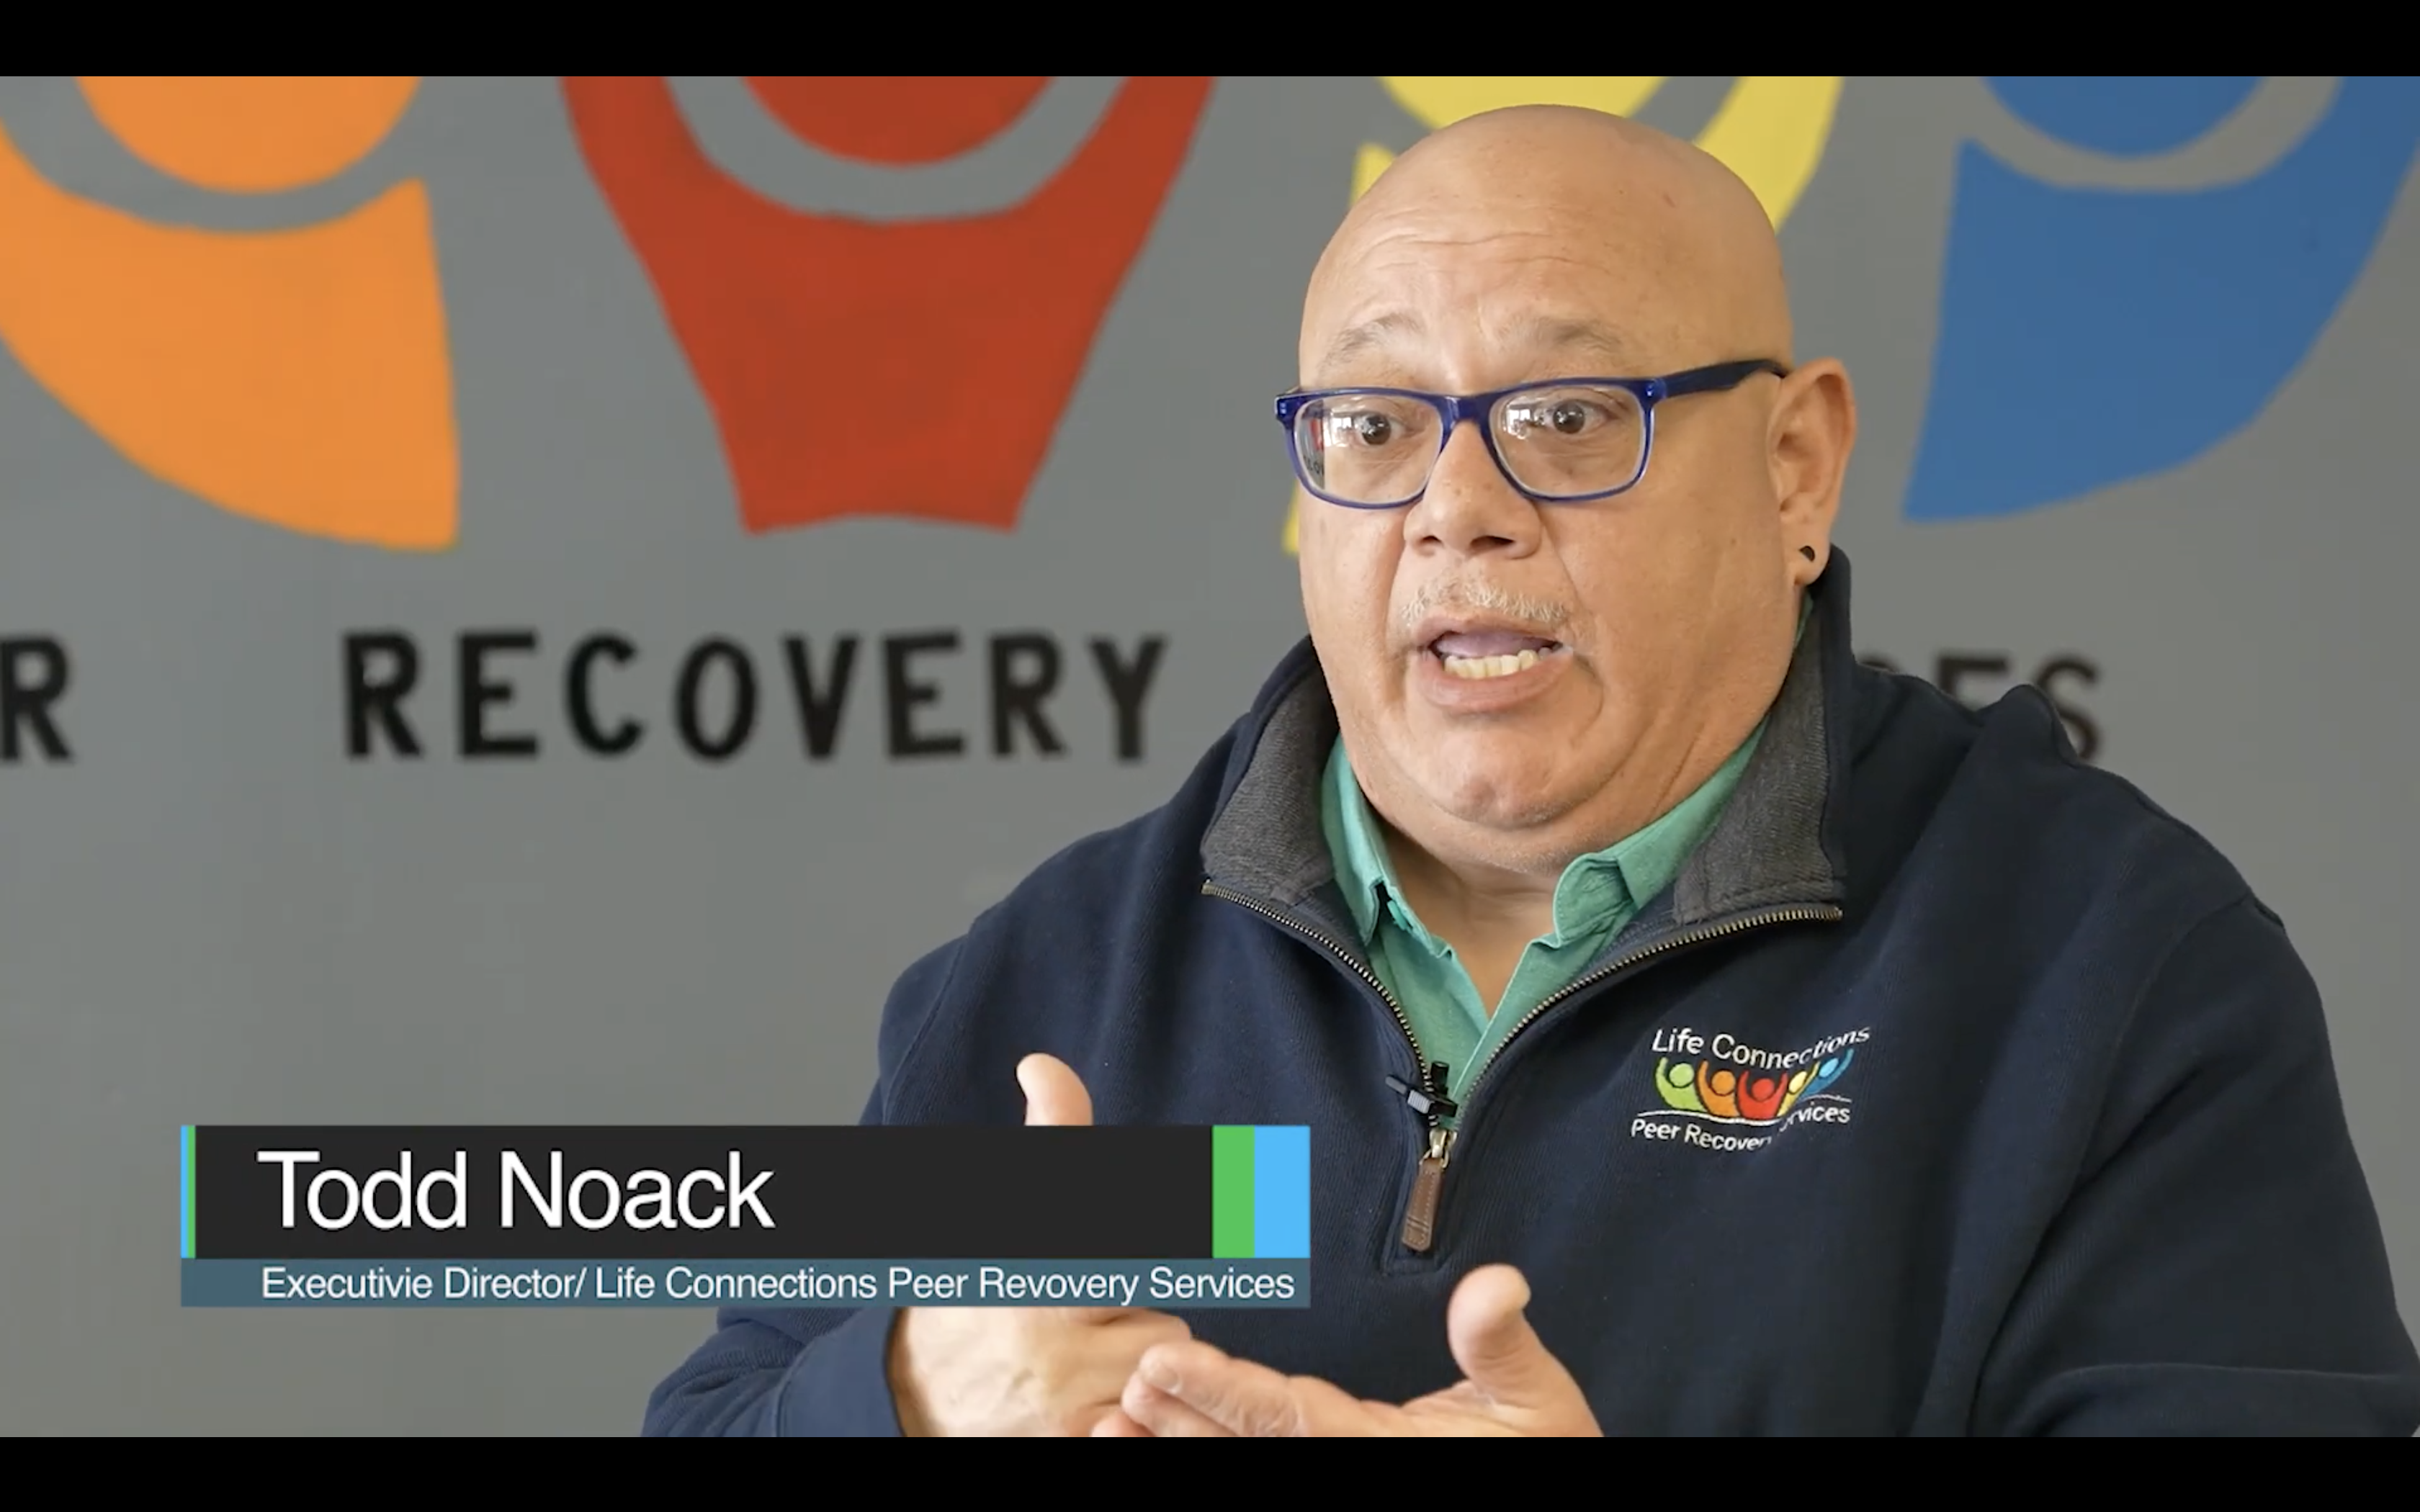 Life Connections Peer Services founder Todd Noack